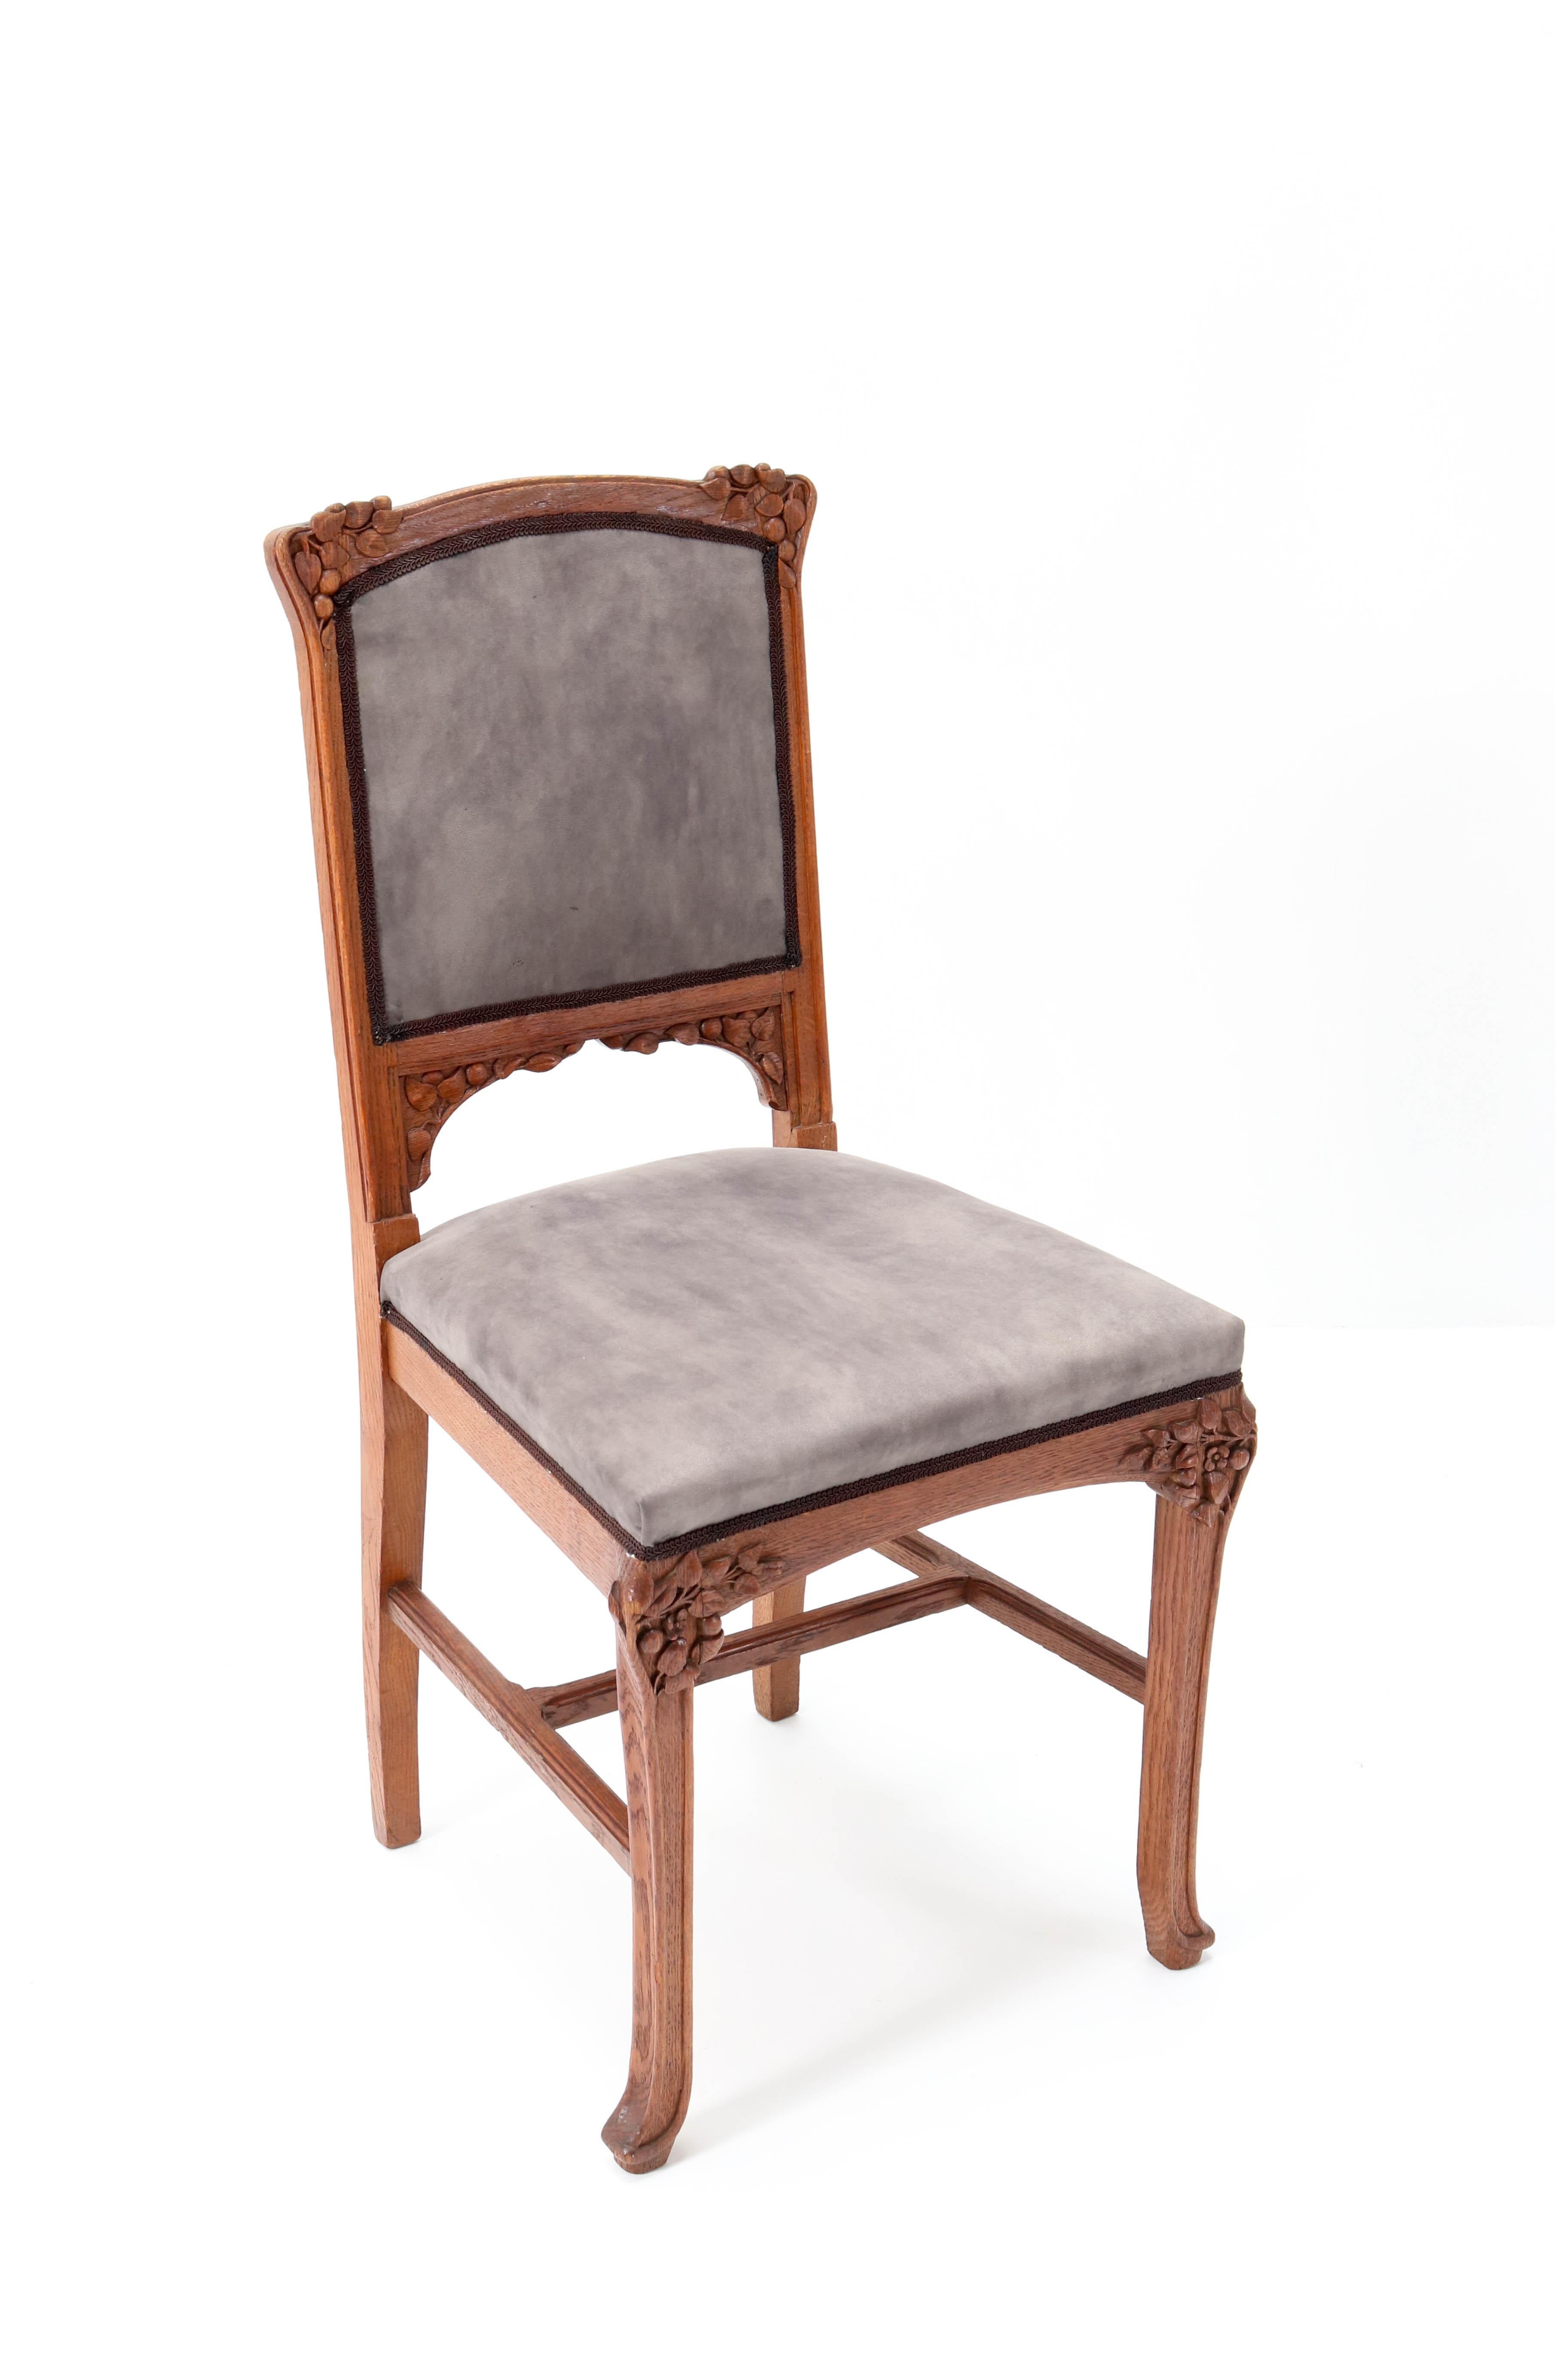 Fabric Six Oak French Art Nouveau Chairs Attributed to Jacques Gruber, 1900s